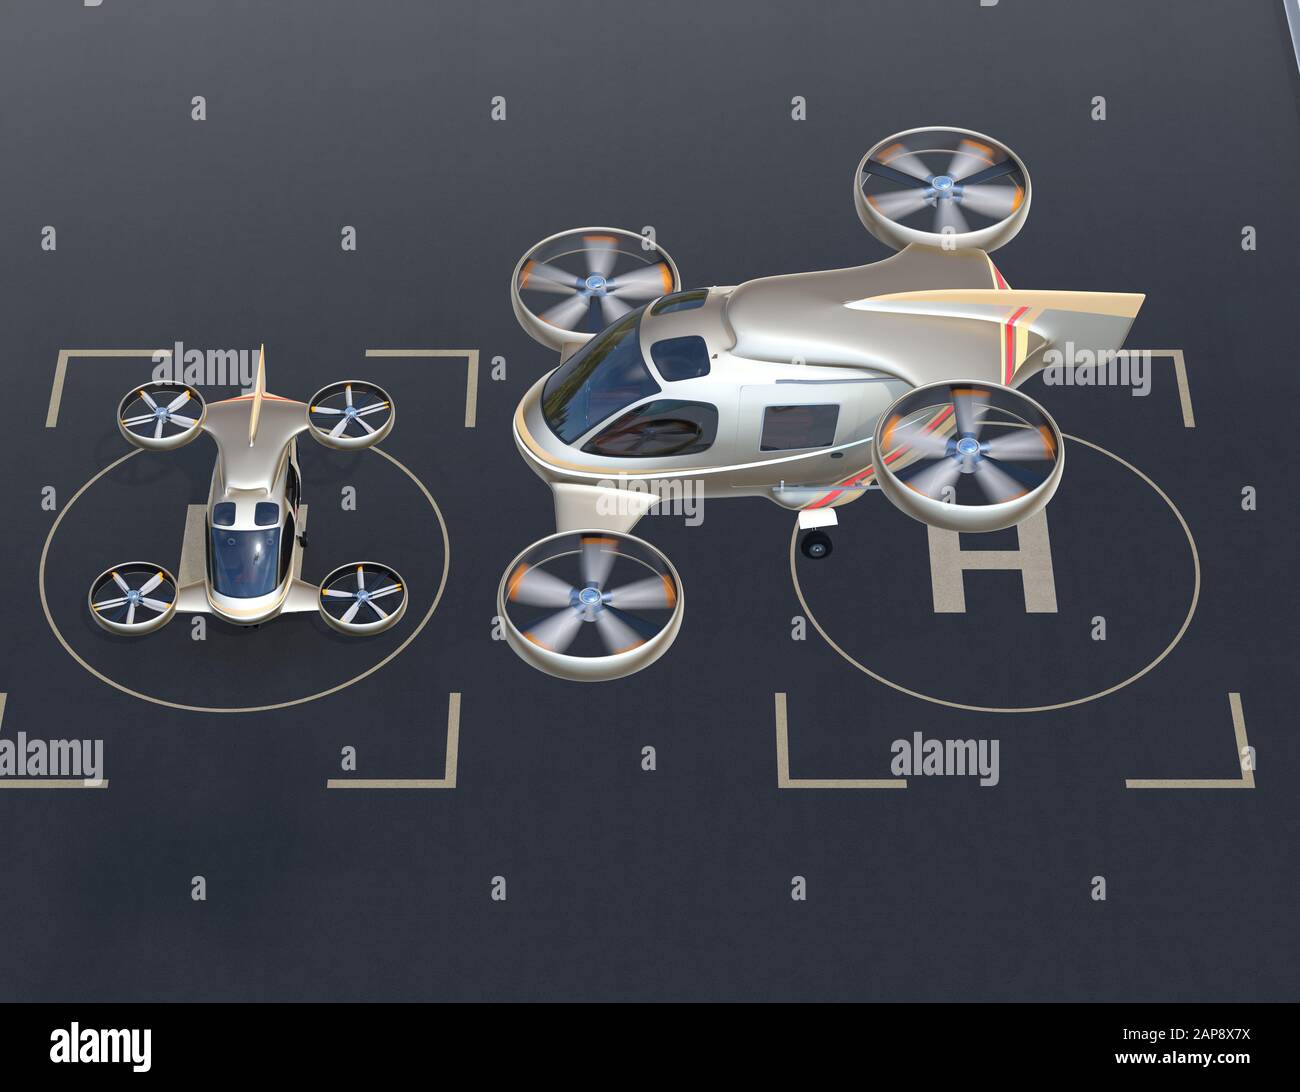 Flying car (air taxi) takeoff from or land to drone Port. 3D rendering image. Stock Photo